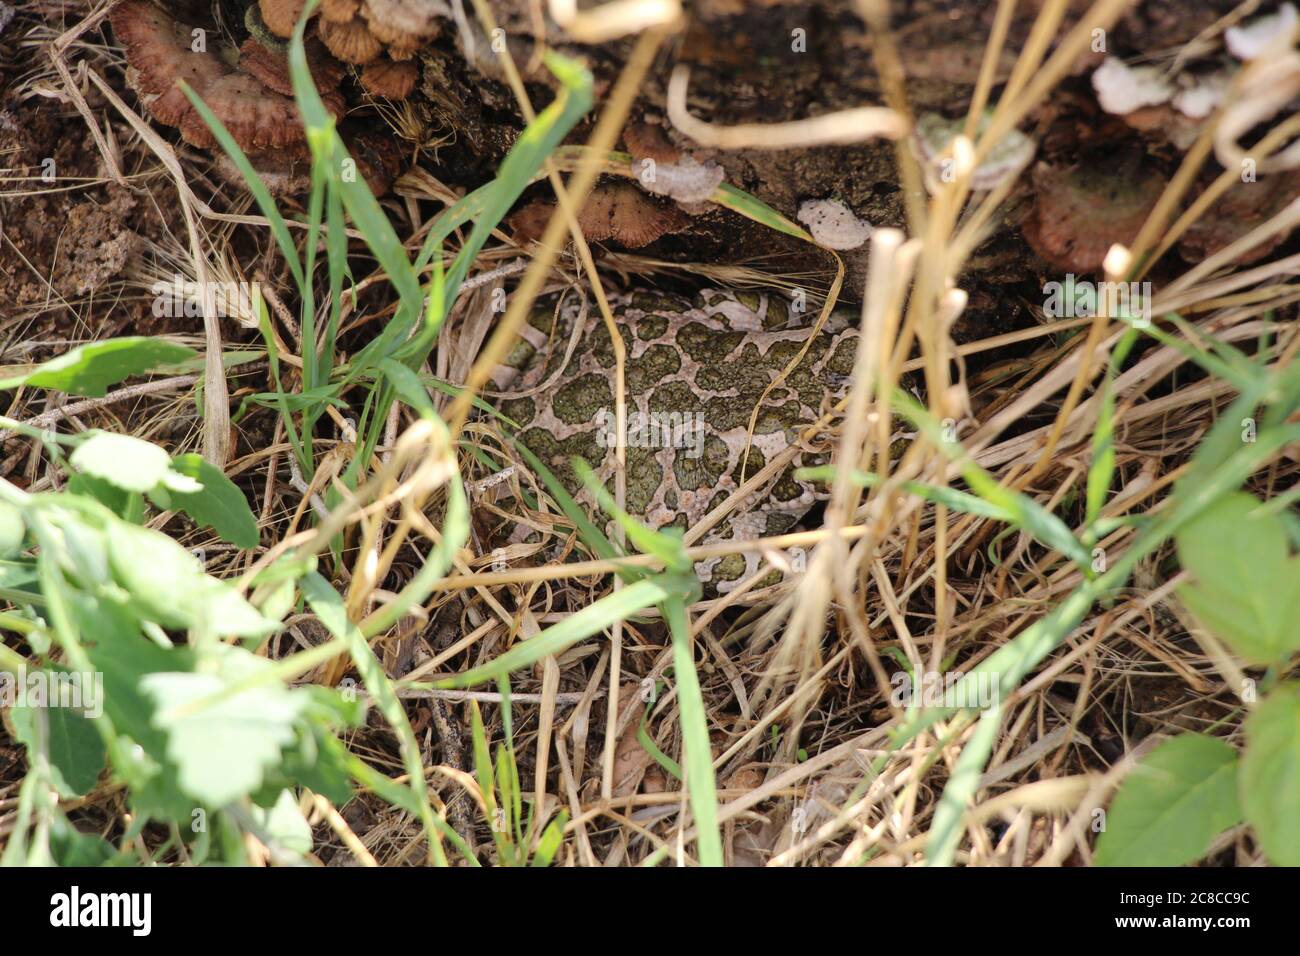 a green toad is exploring the grounds Stock Photo